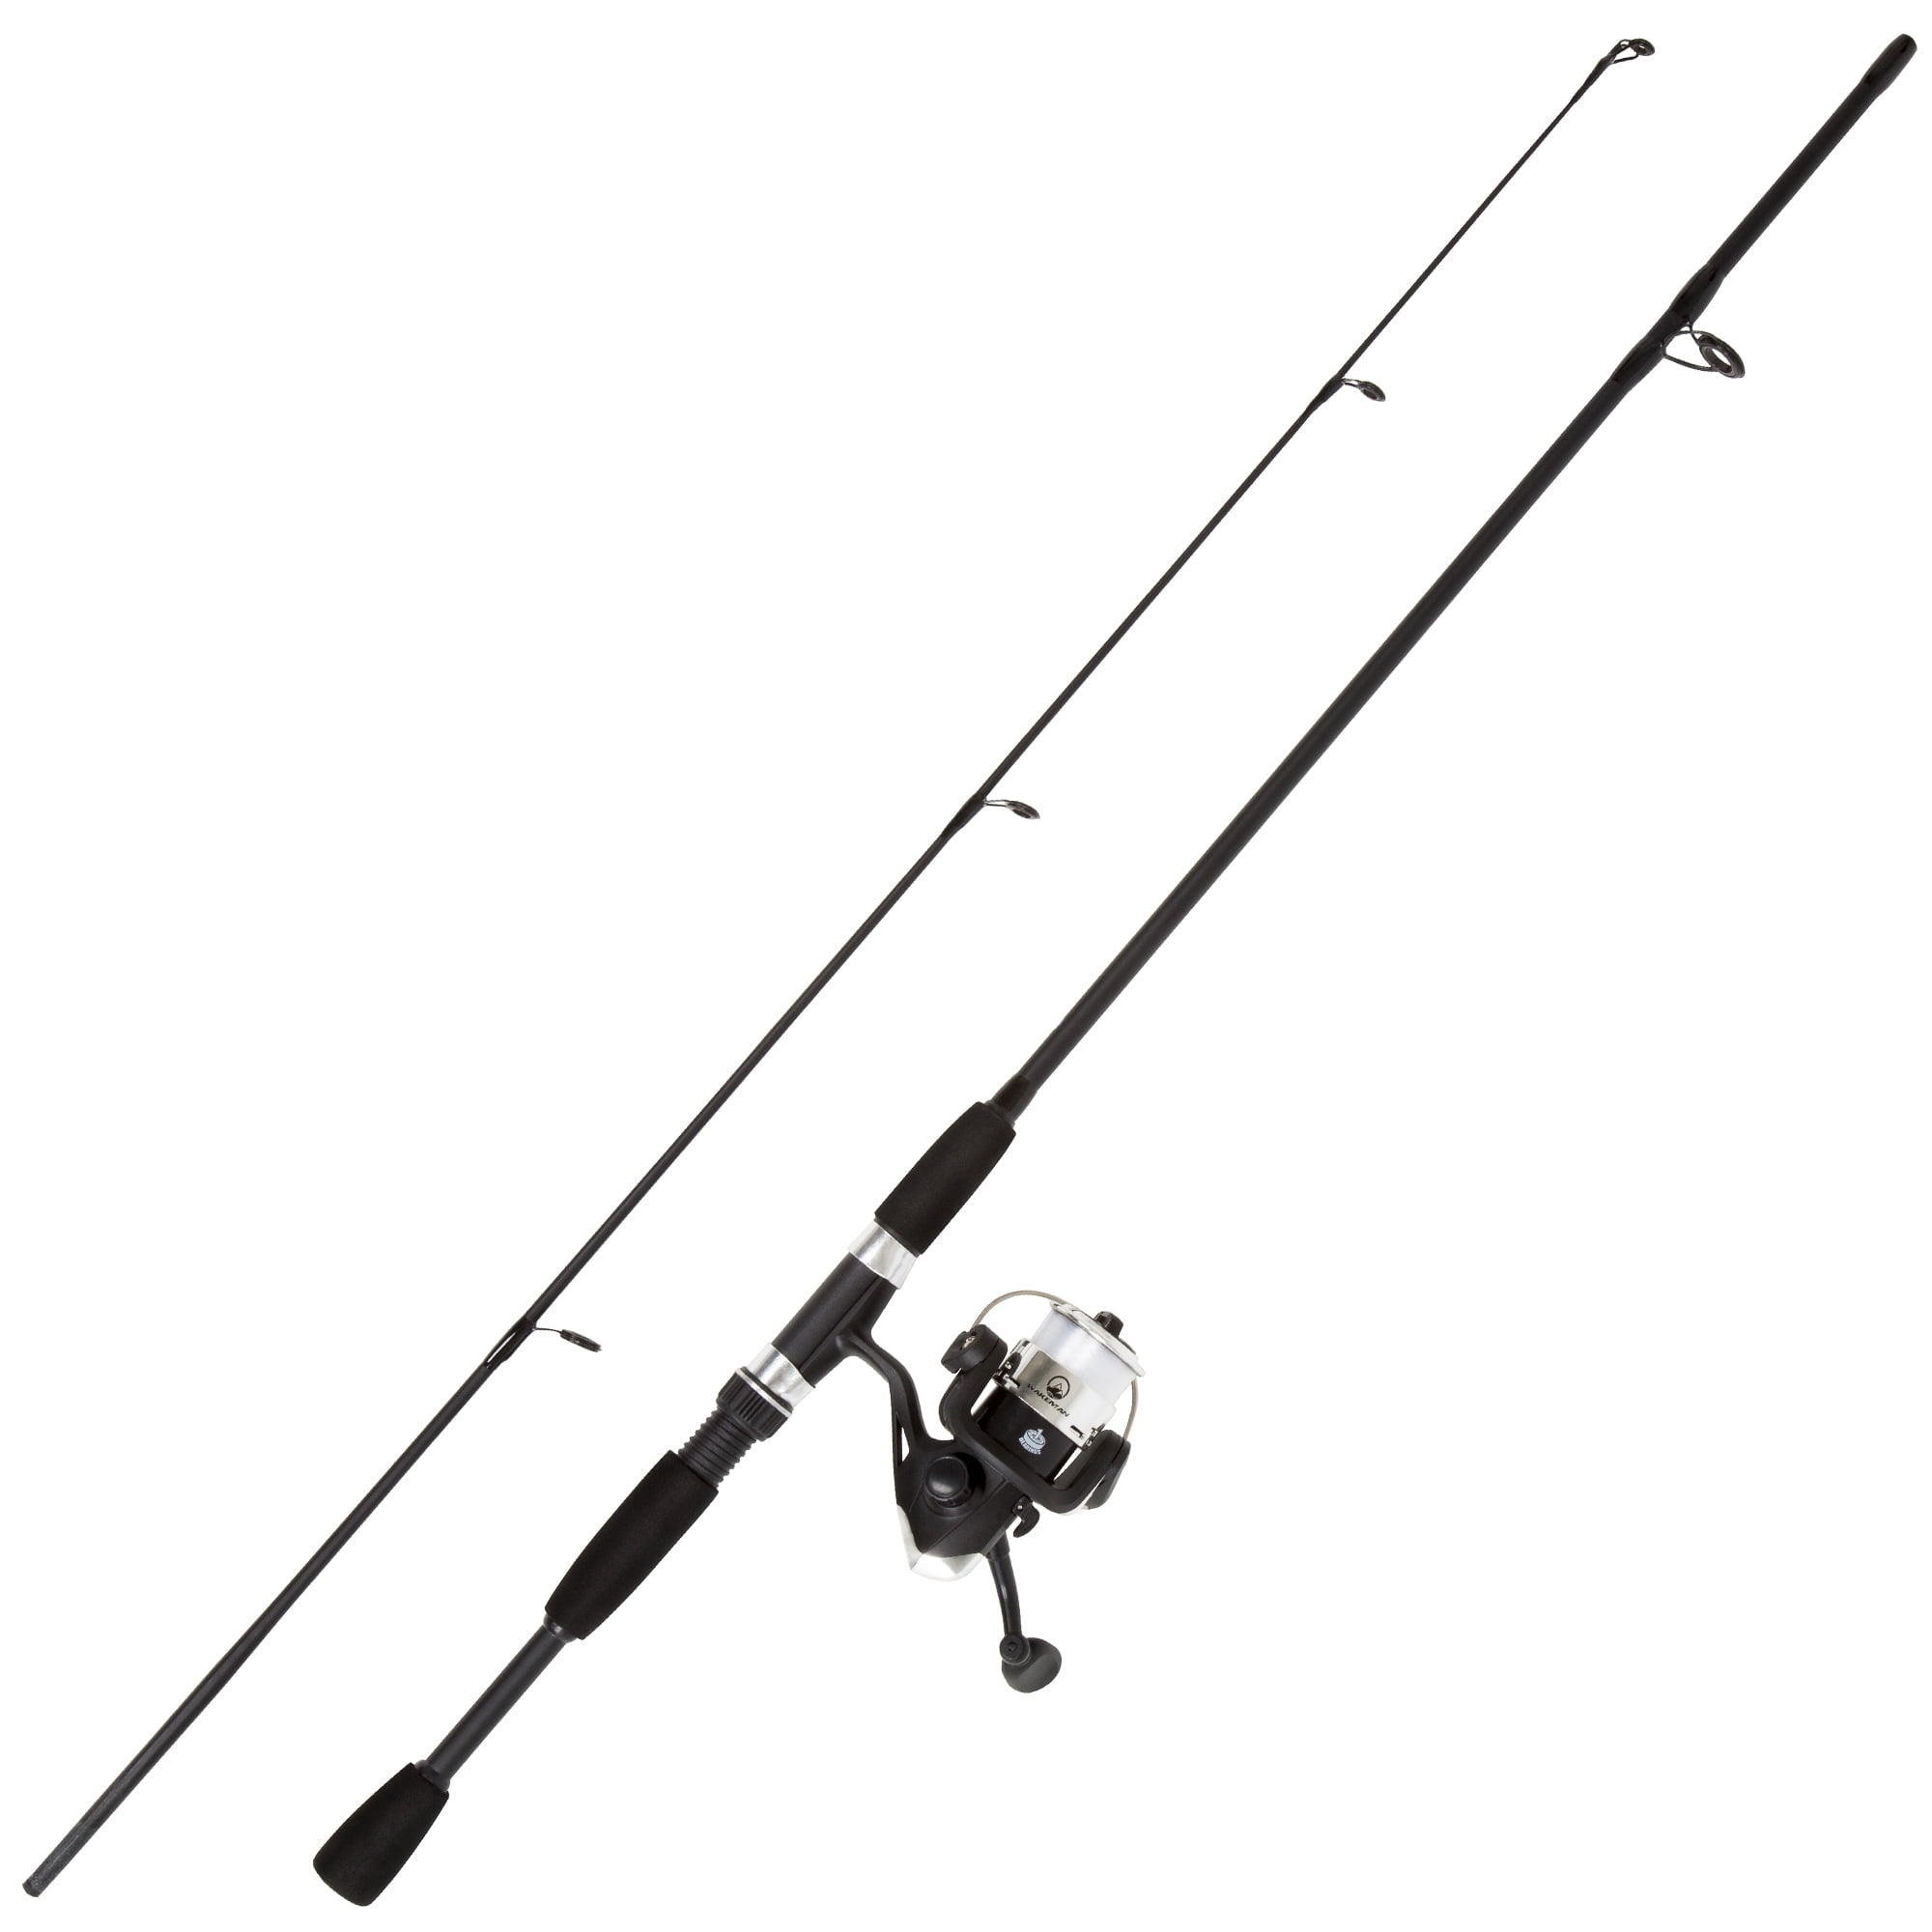 Shakespeare Alpha Medium 6 Low Profile 6' 04fishing Rod and Bait Cast Reel Combo for sale online 